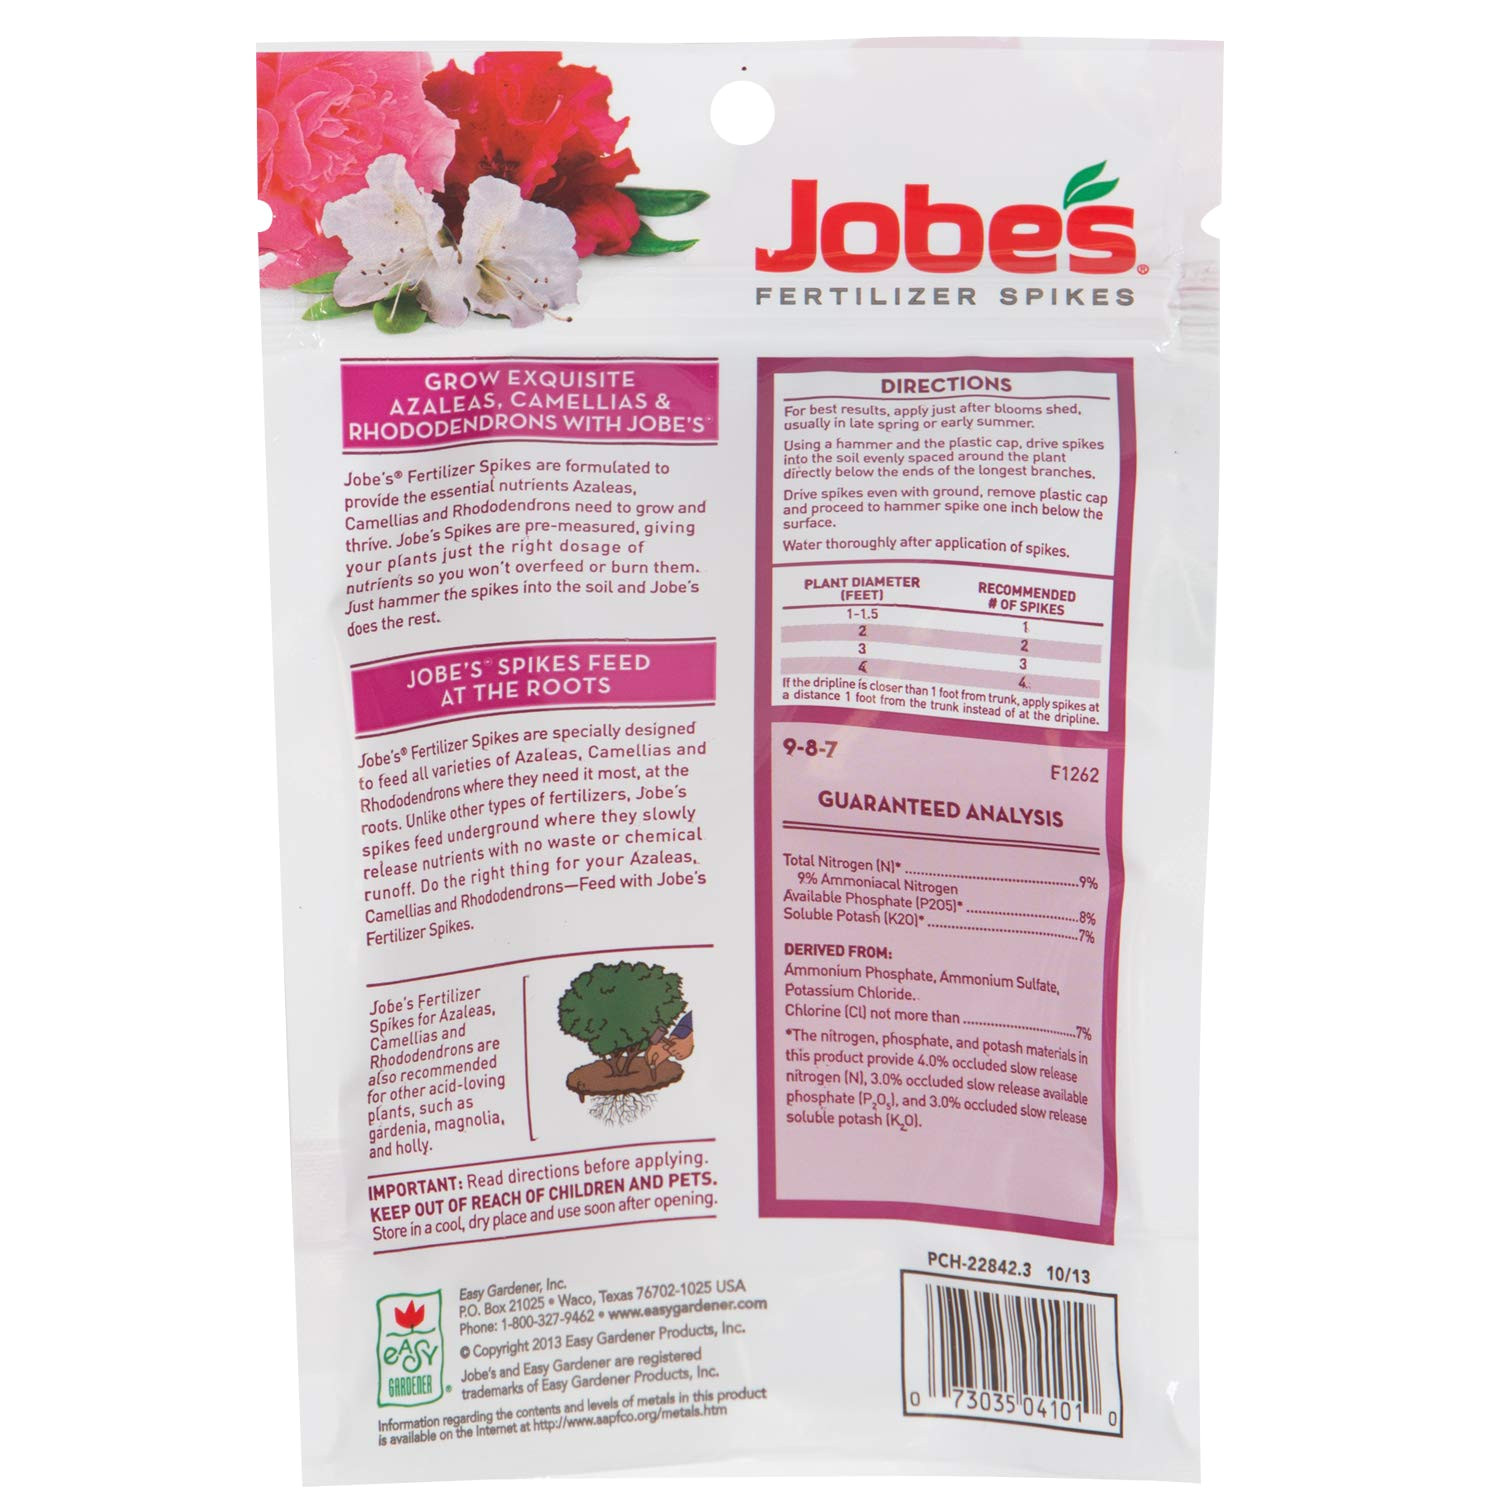 amazon com jobe s fertilizer spikes for azalea camellia and rhododendron 9 8 7 time release fertilizer for acid loving plants 10 spikes per package